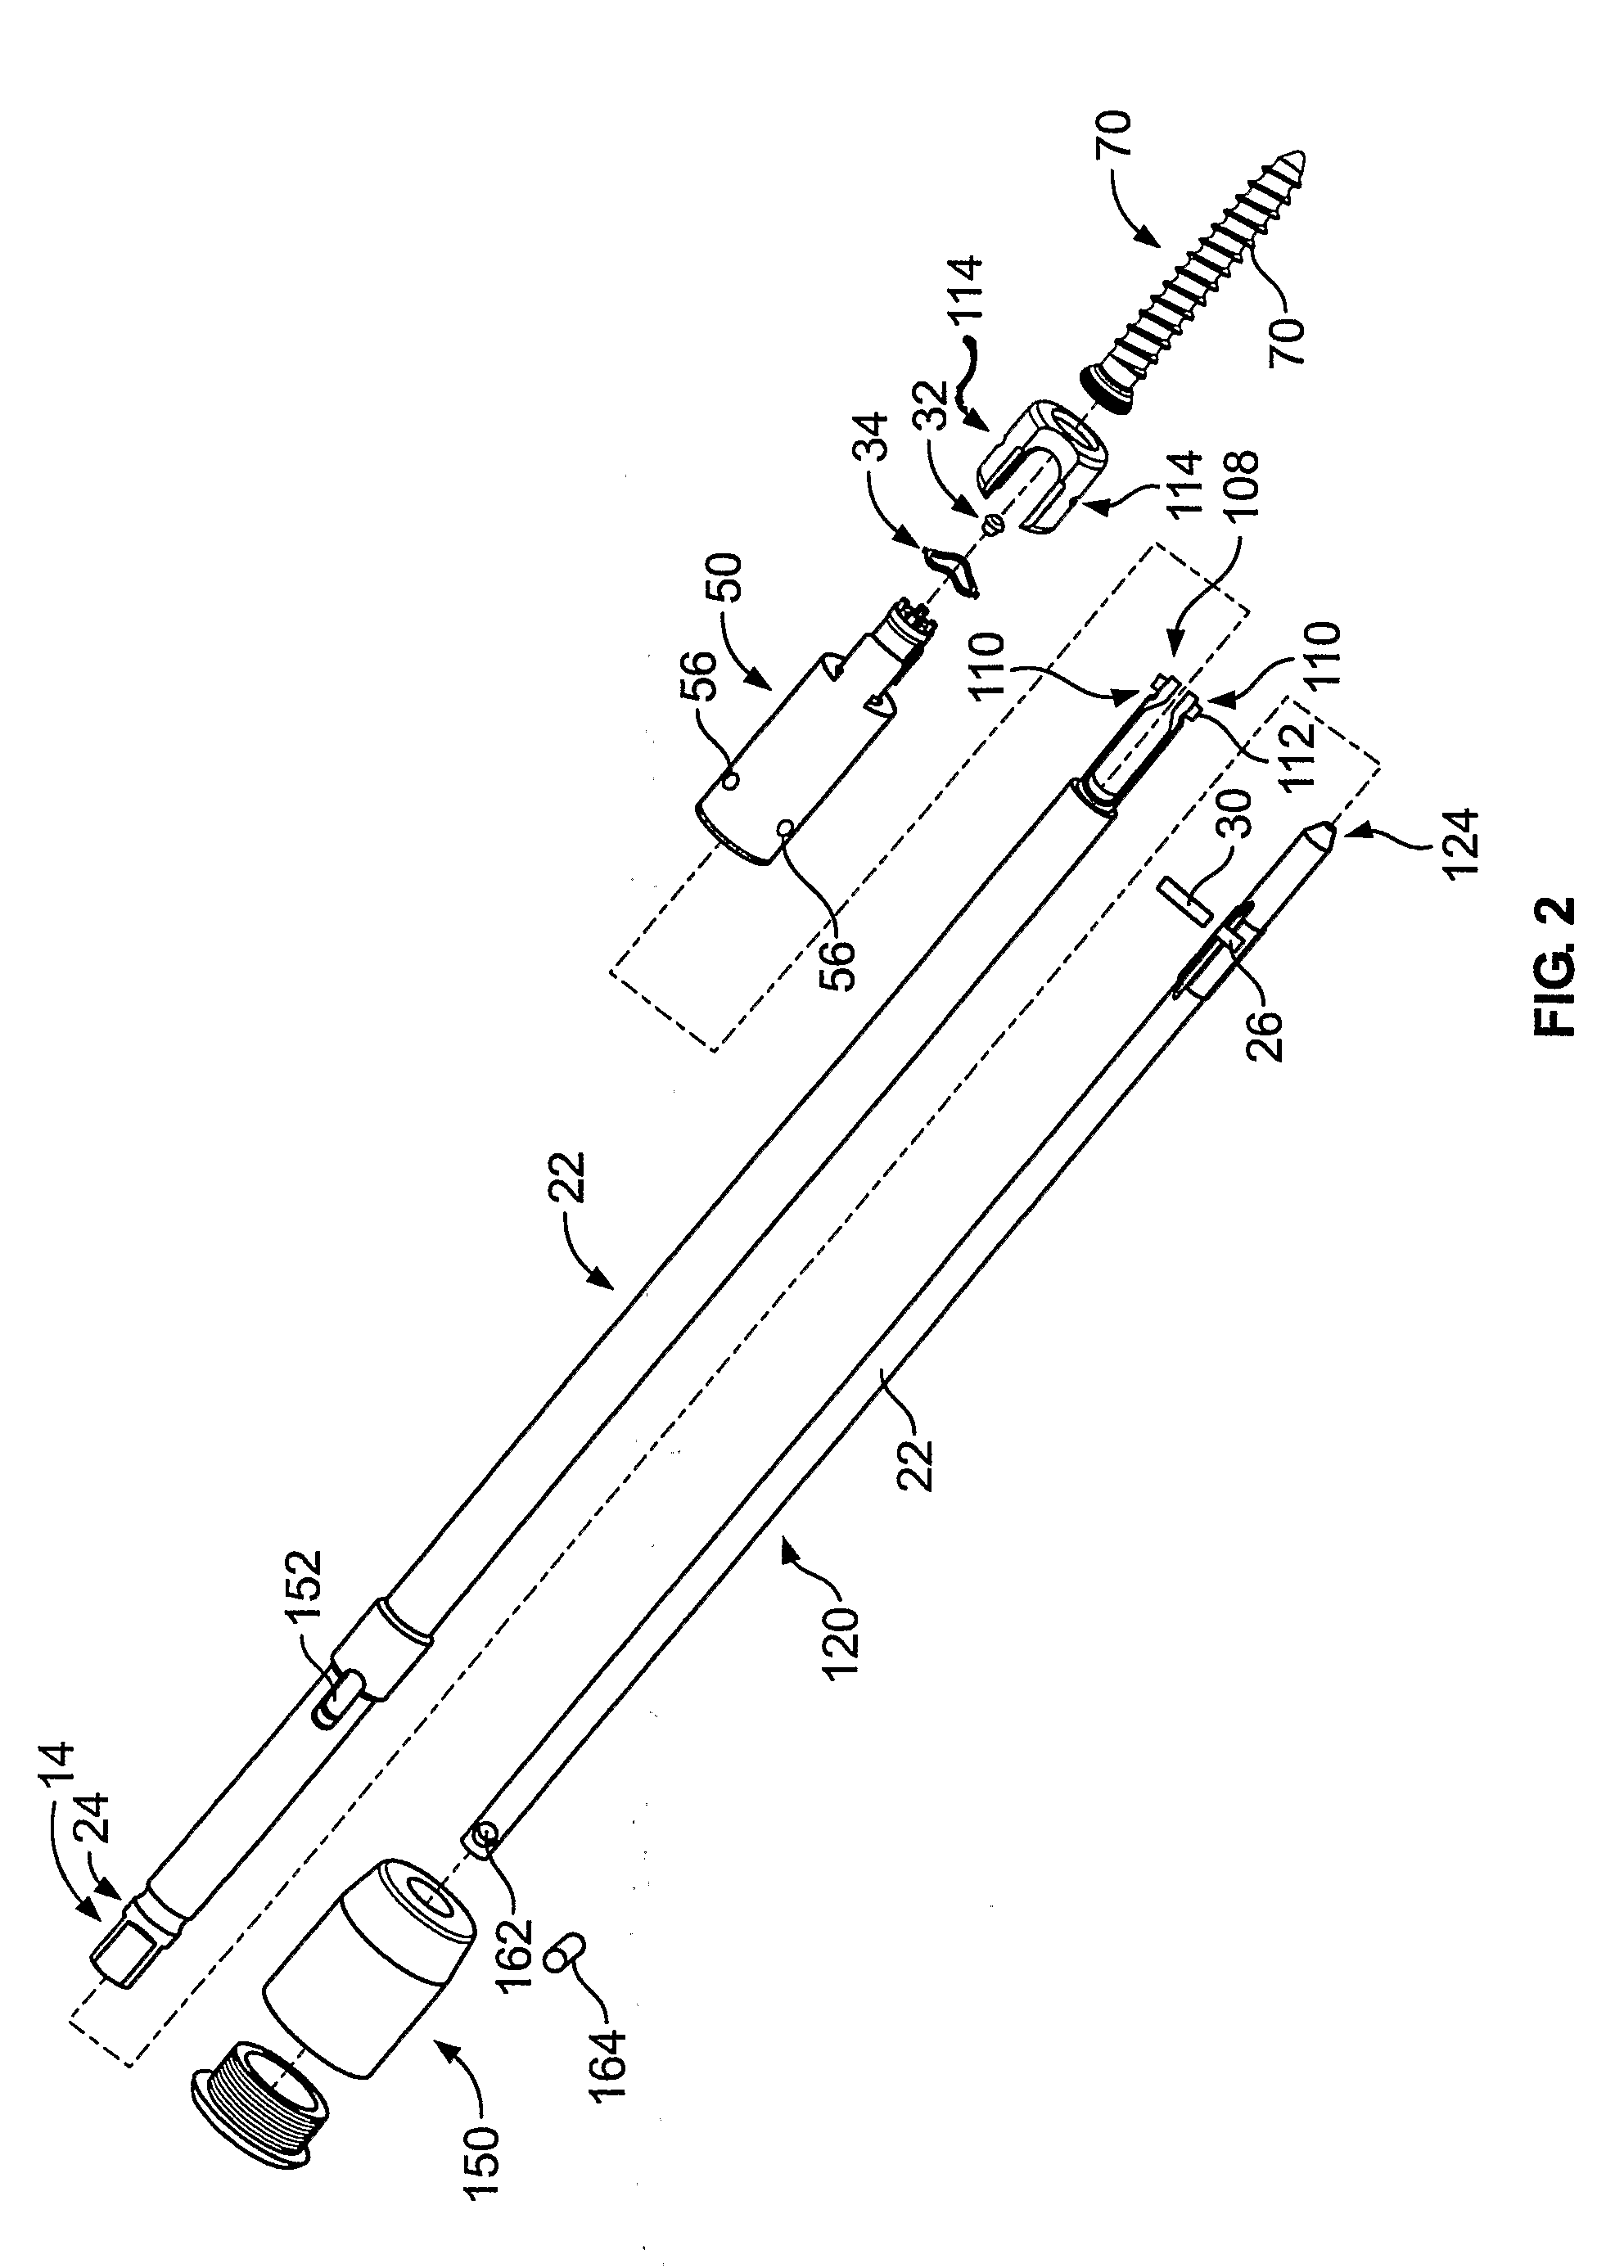 Apparatus and Method for Implantation of Surgical Devices